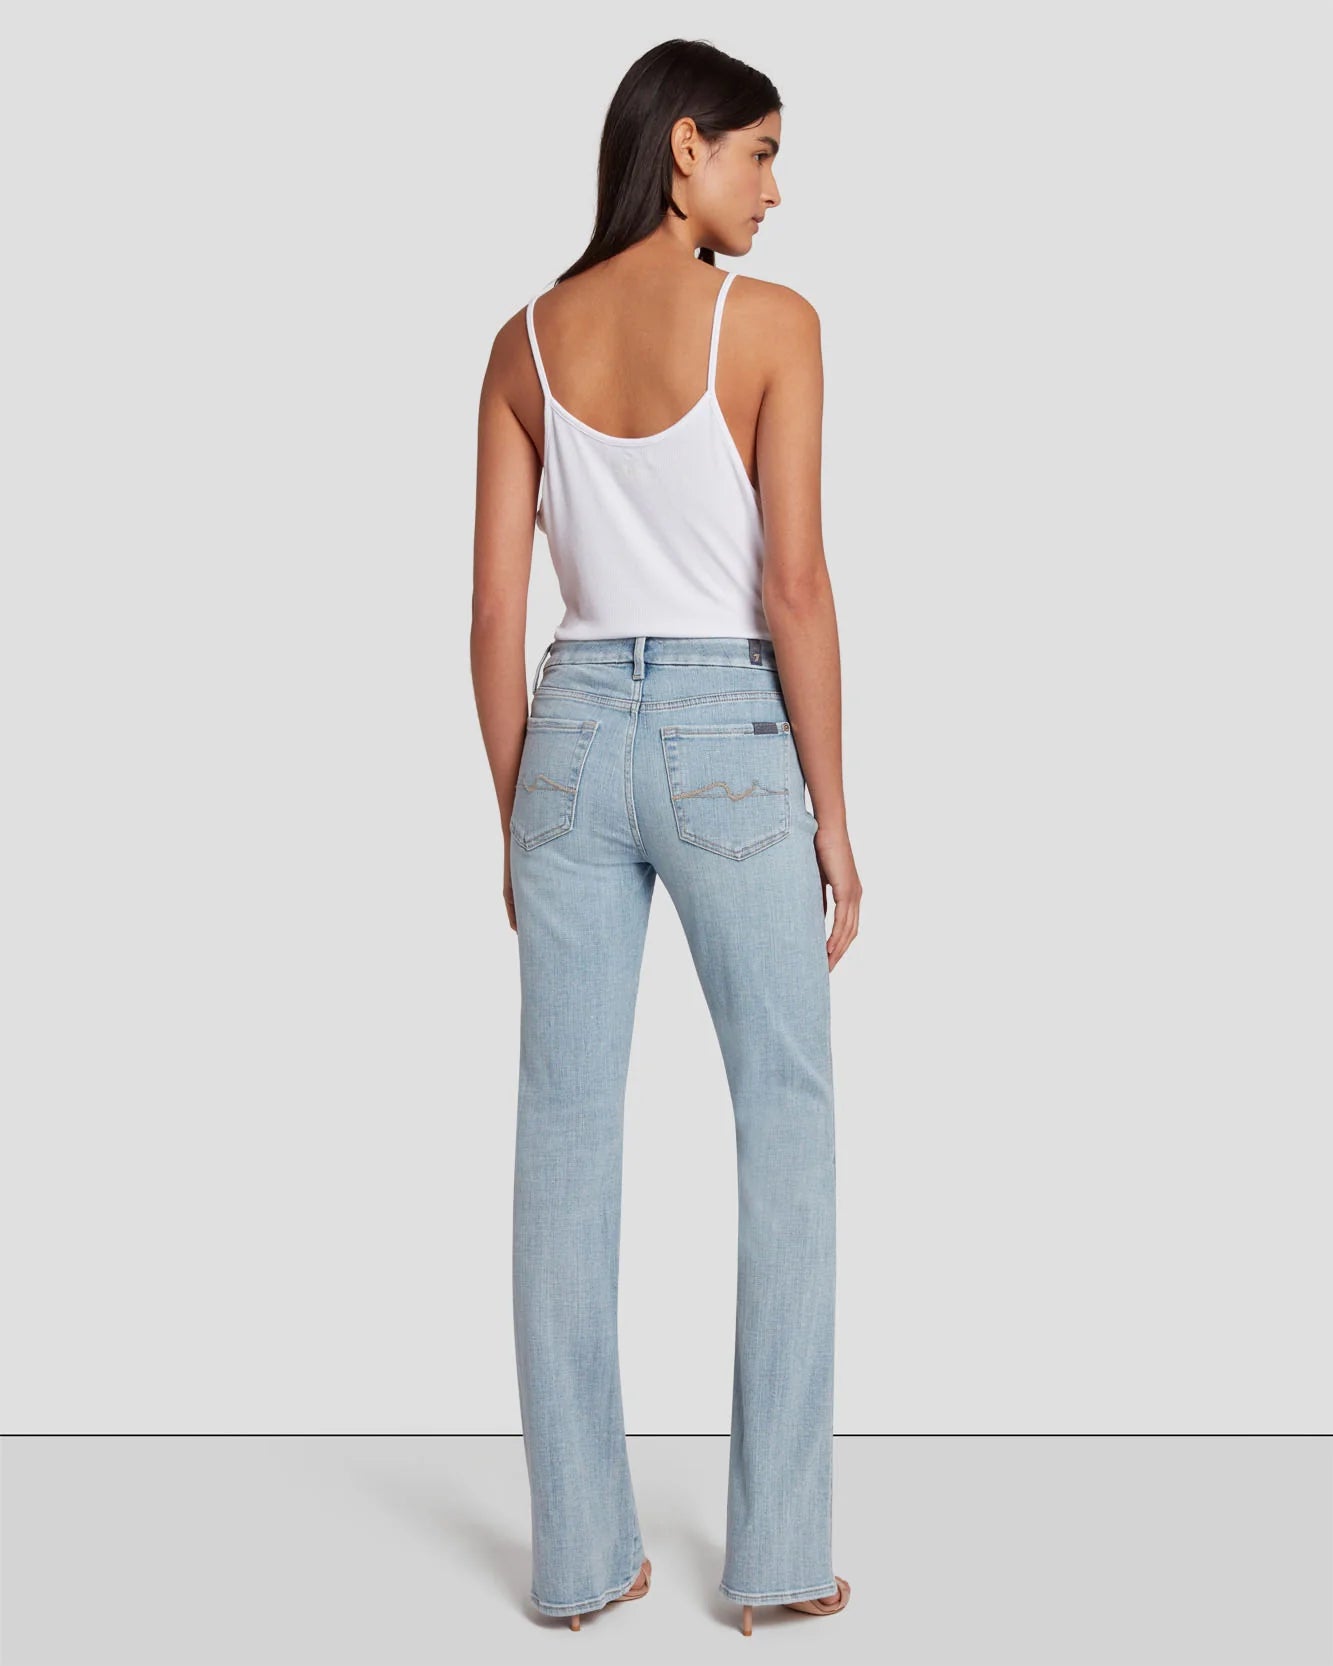 Kimmie Bootcut Jeans in Coco Prive